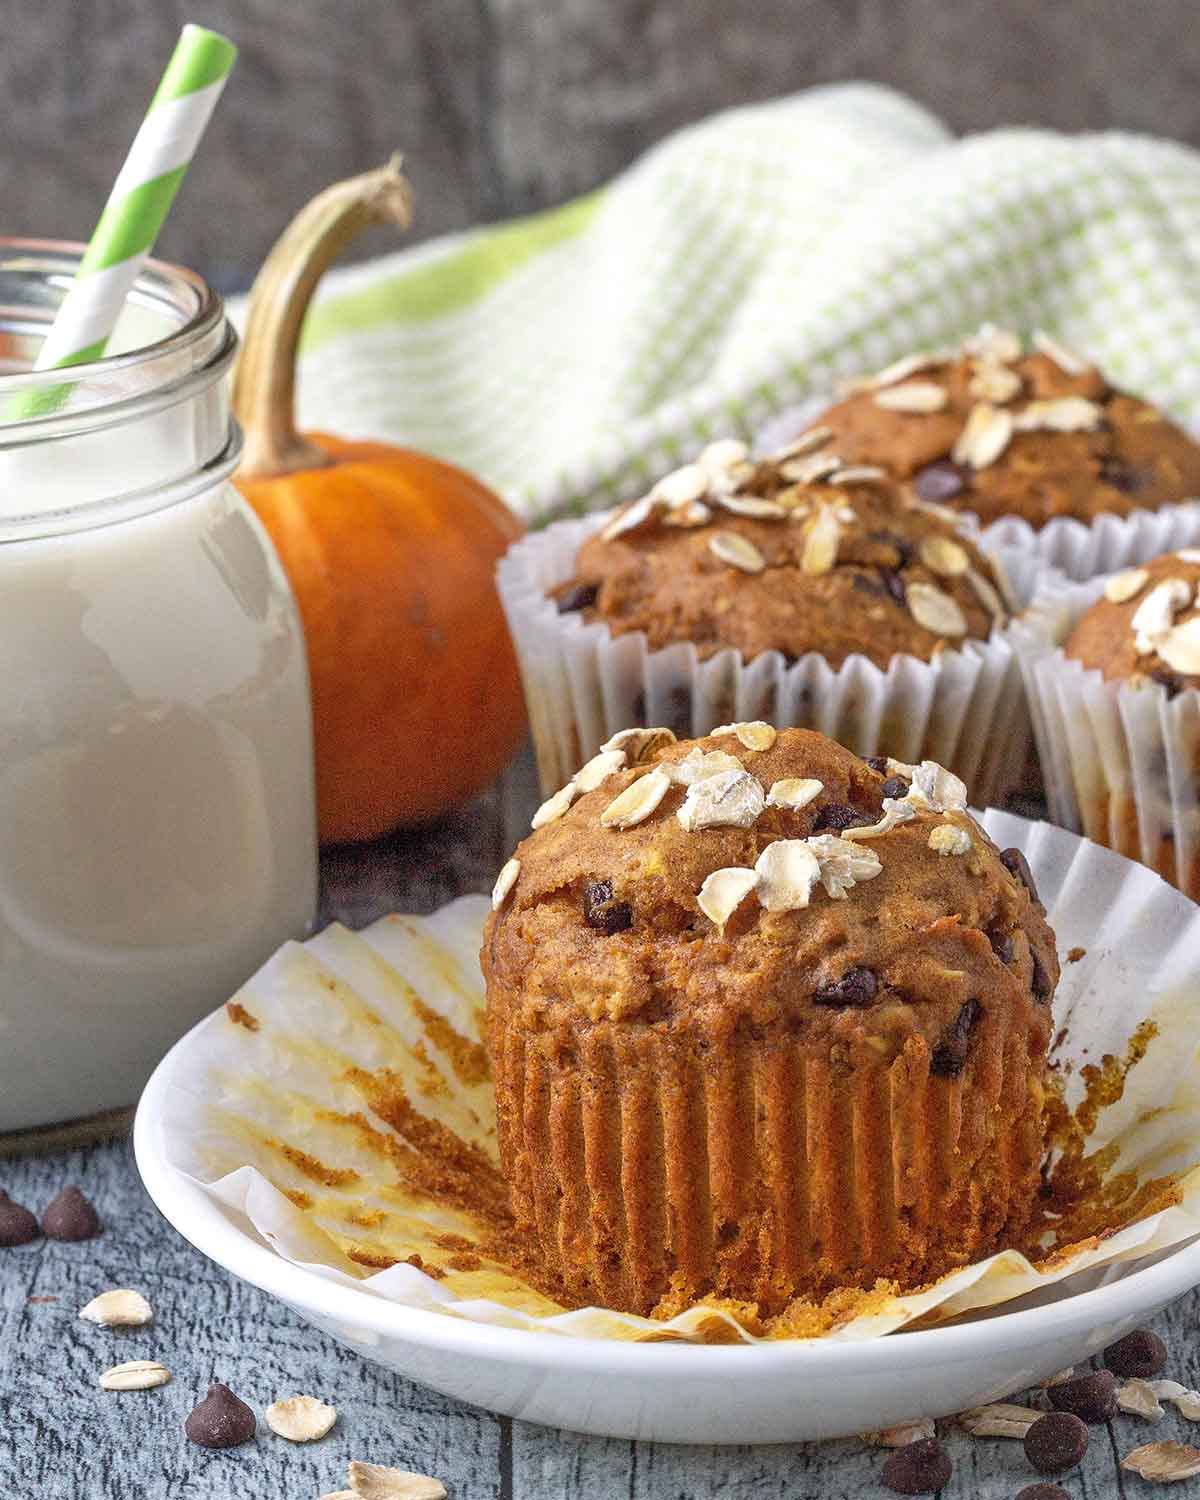 A pumpkin oatmeal muffin on a plate, the muffin wrapper has been peeled away.